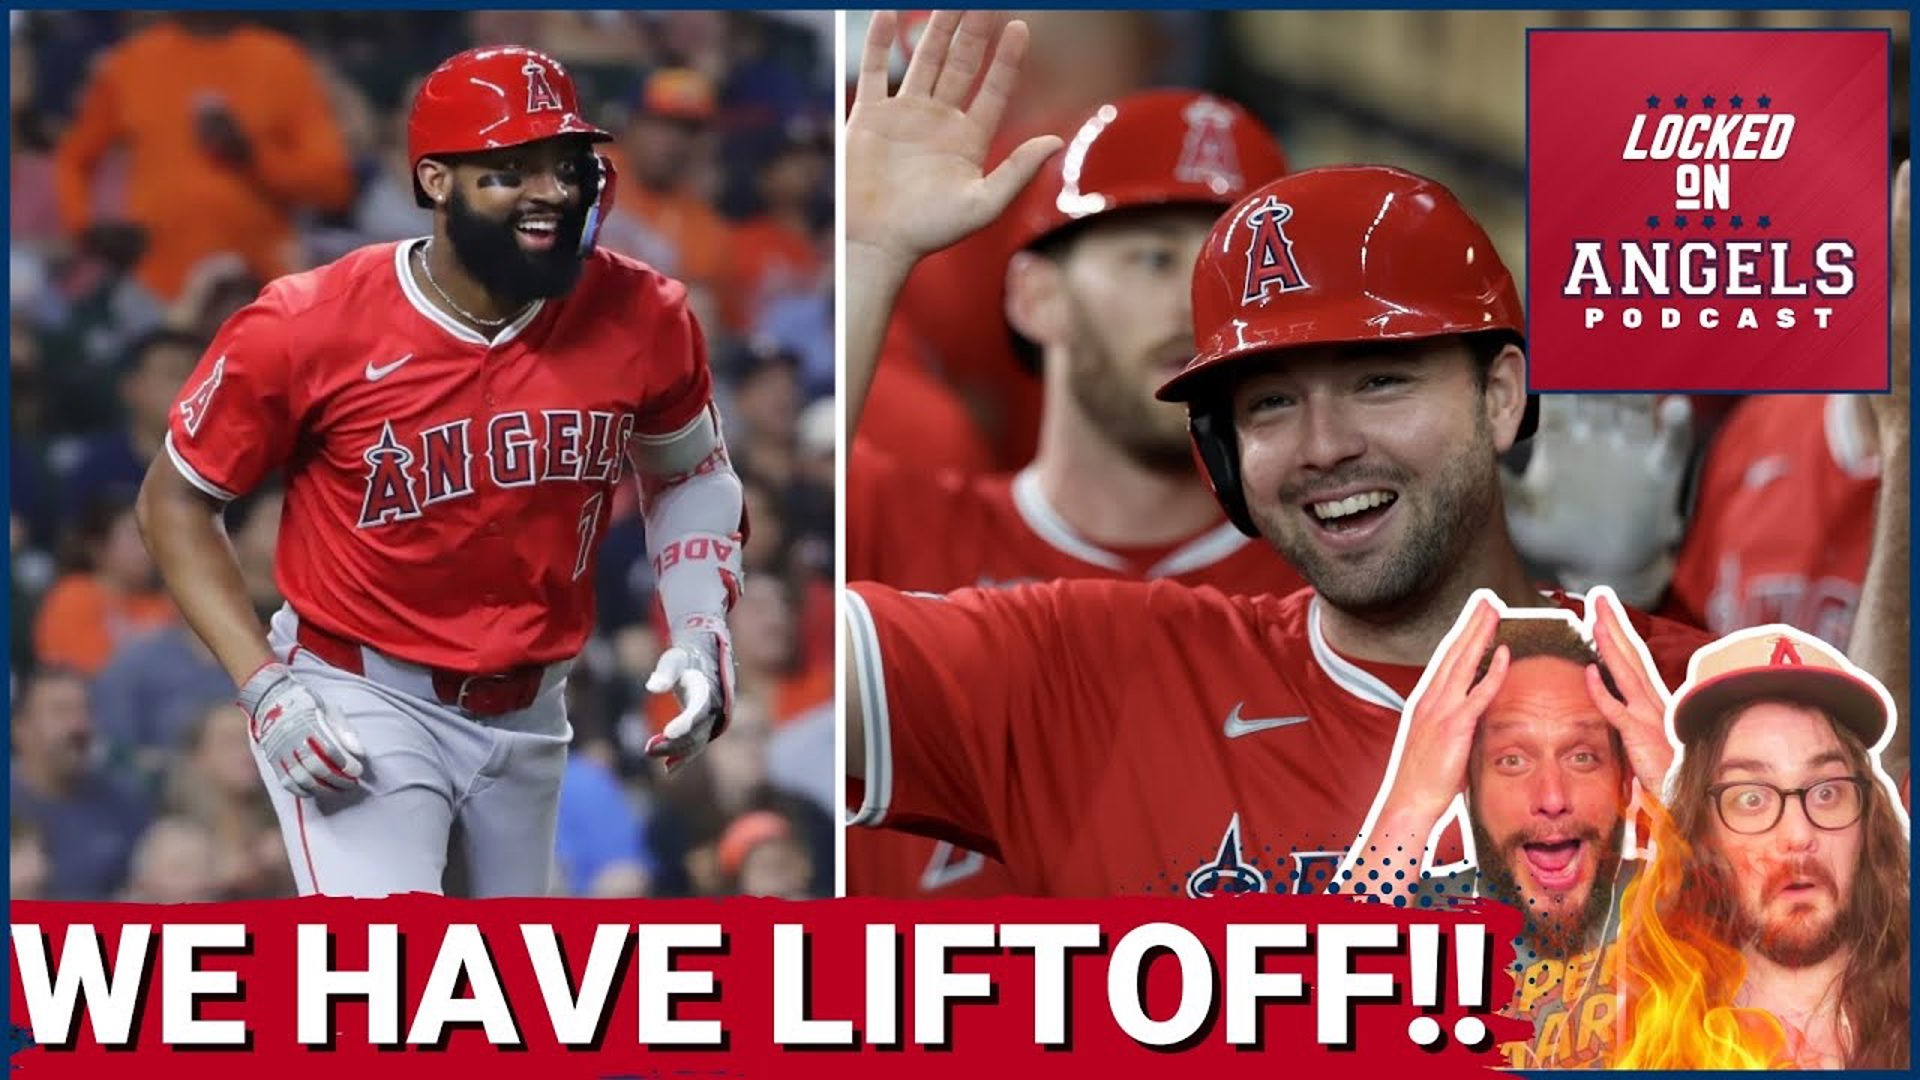 The Los Angeles Angels added another W against the AL West in an incredible comeback victory against the Houston Astros!